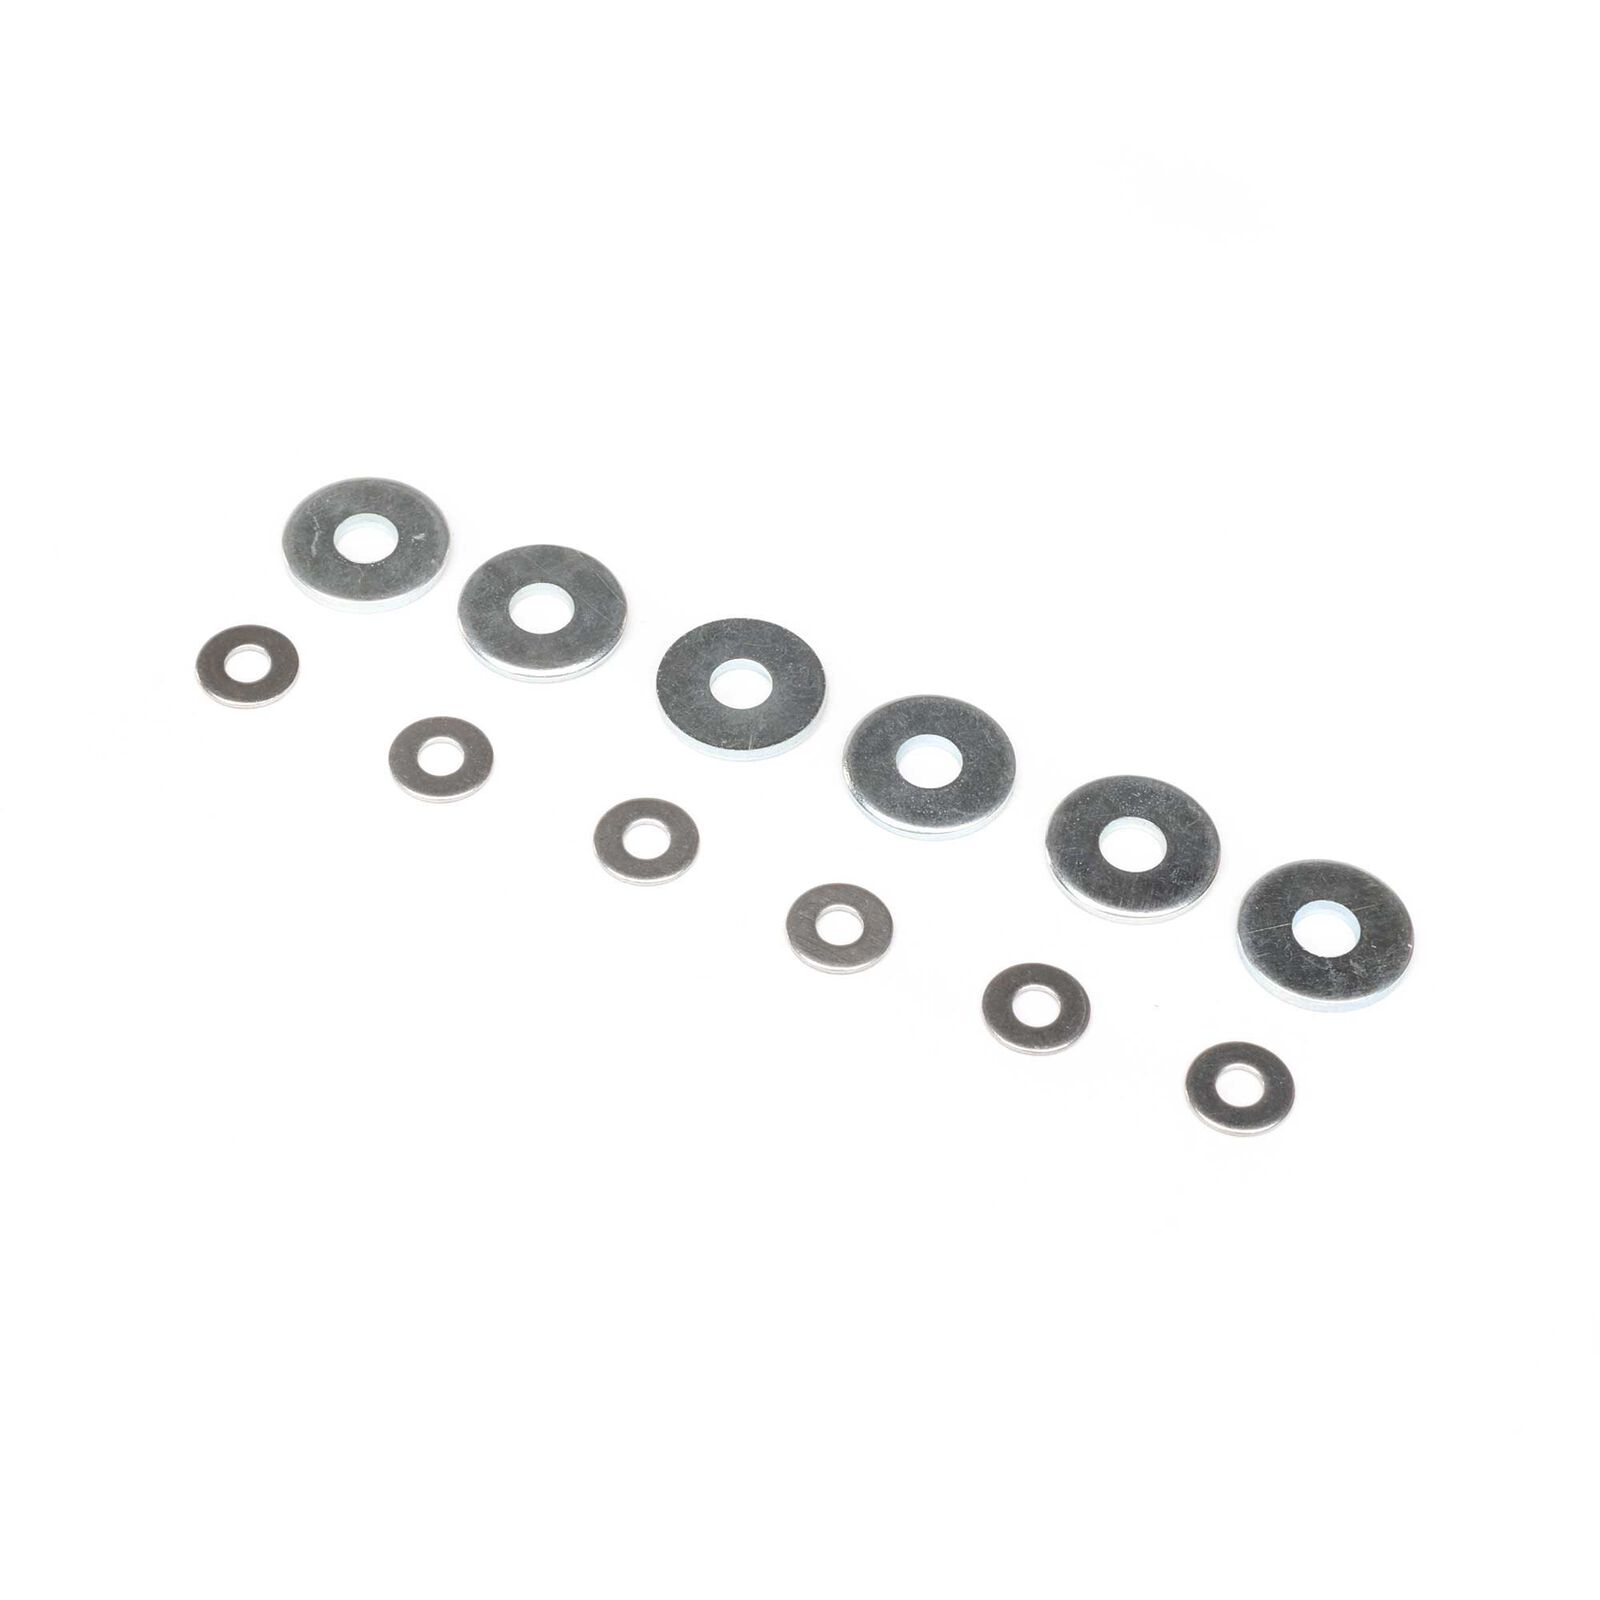 Washers, 3.6 x 10mm (6)